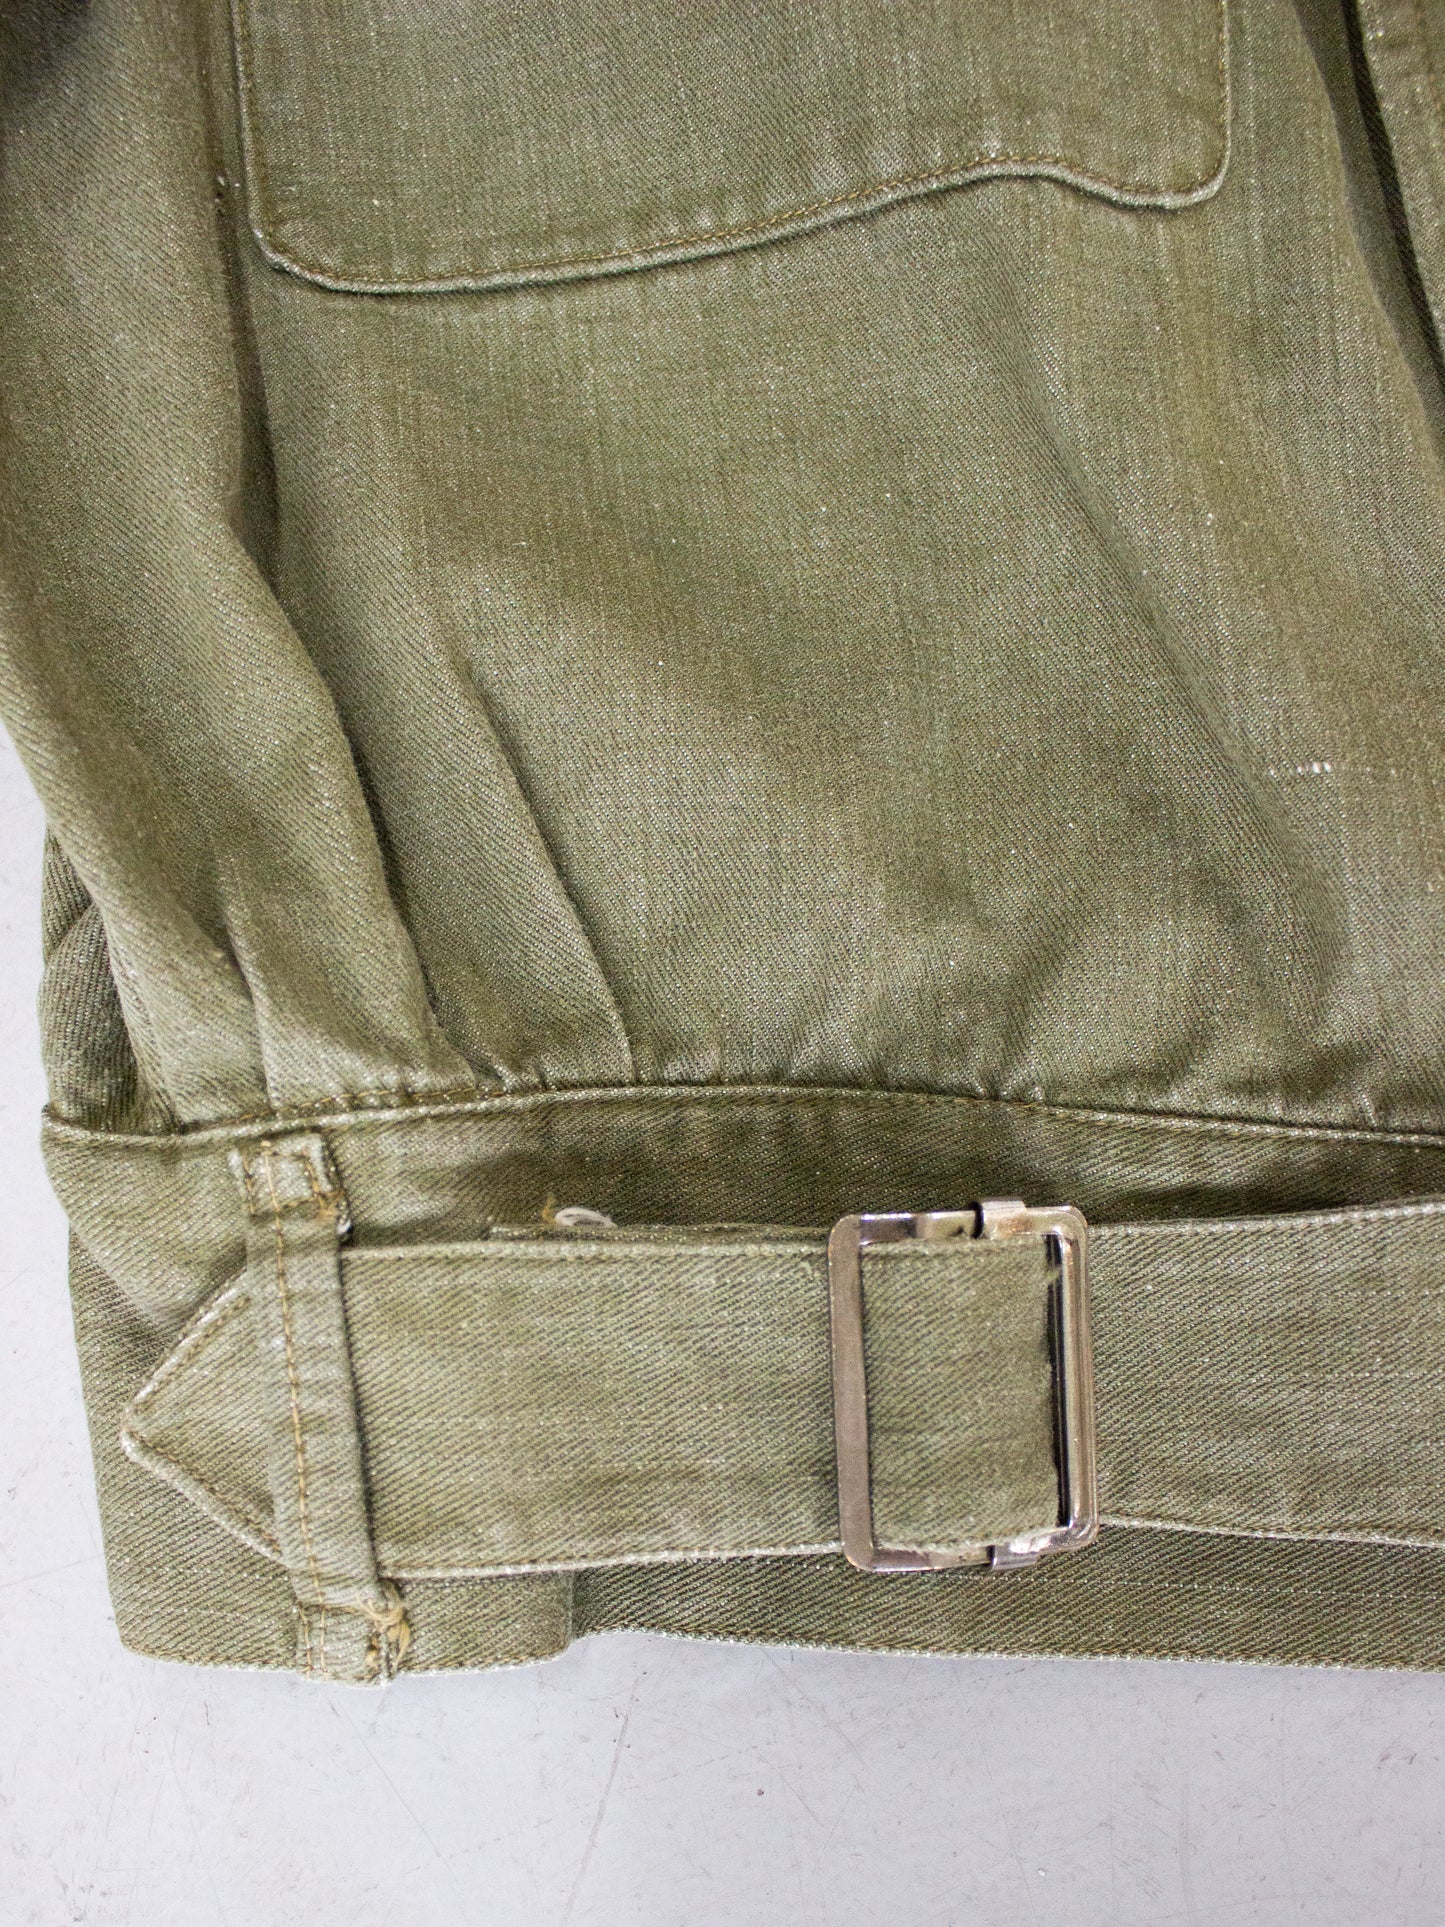 1950's British Military Royal Marines Overalls Blouse Jacket in Olive Green Cotton Label Dated 1952 (Size Medium - Large)